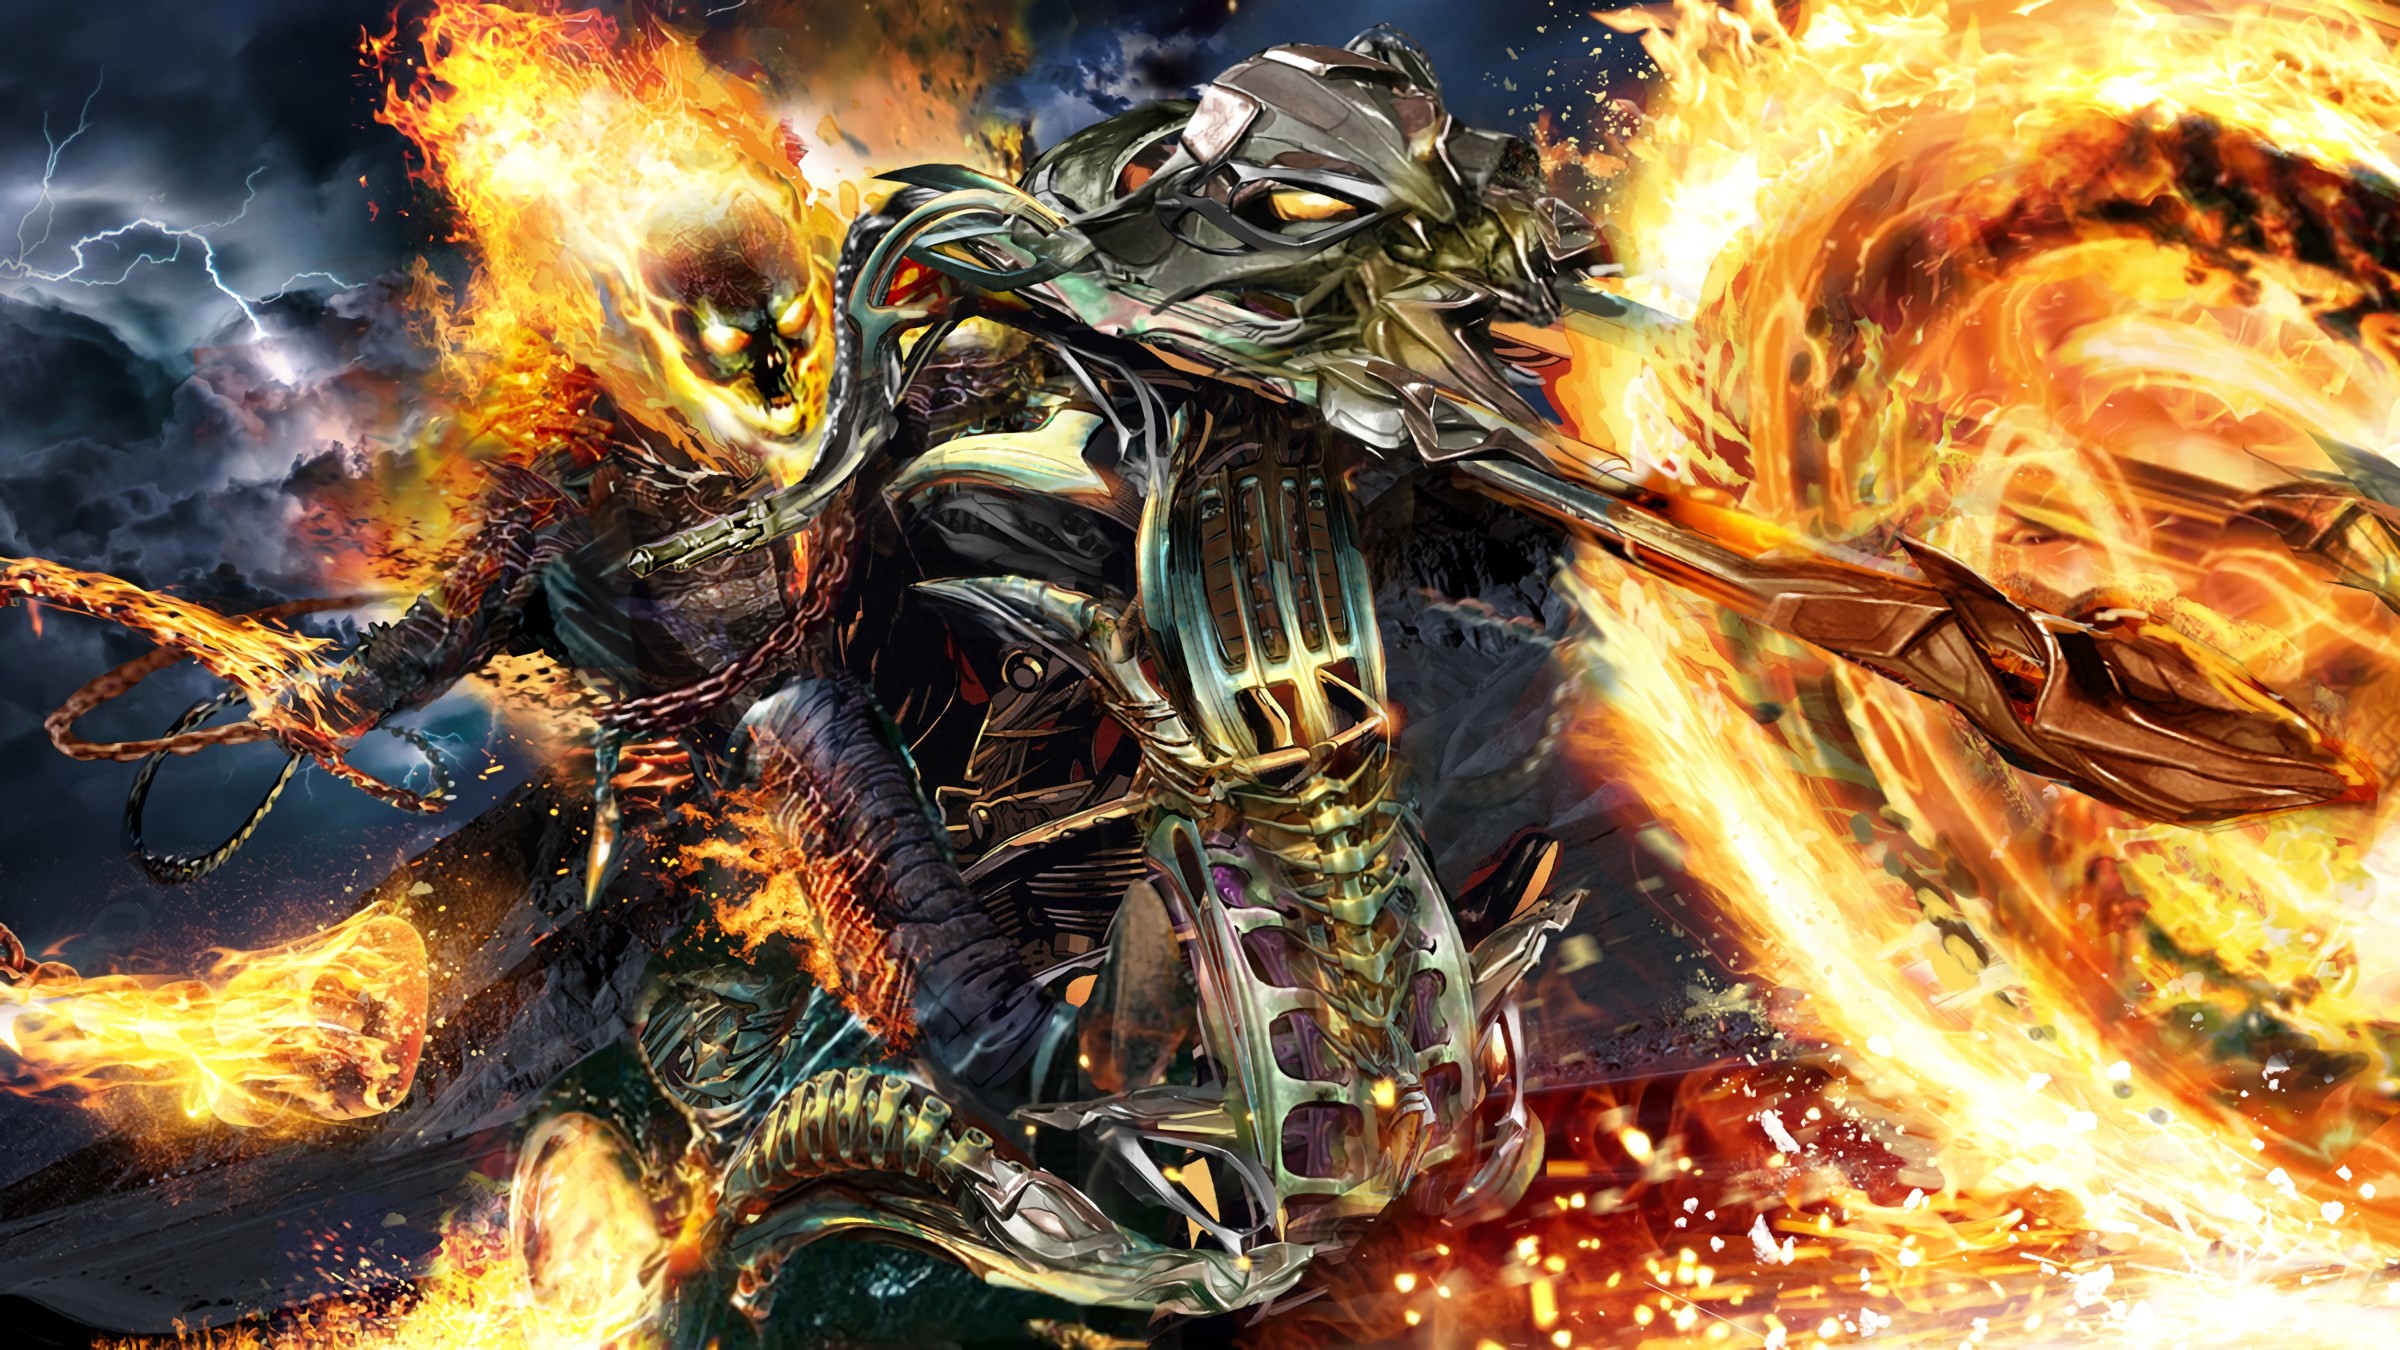 2400x1350 ... ghost rider wallpaper collection 1920x1080 ...